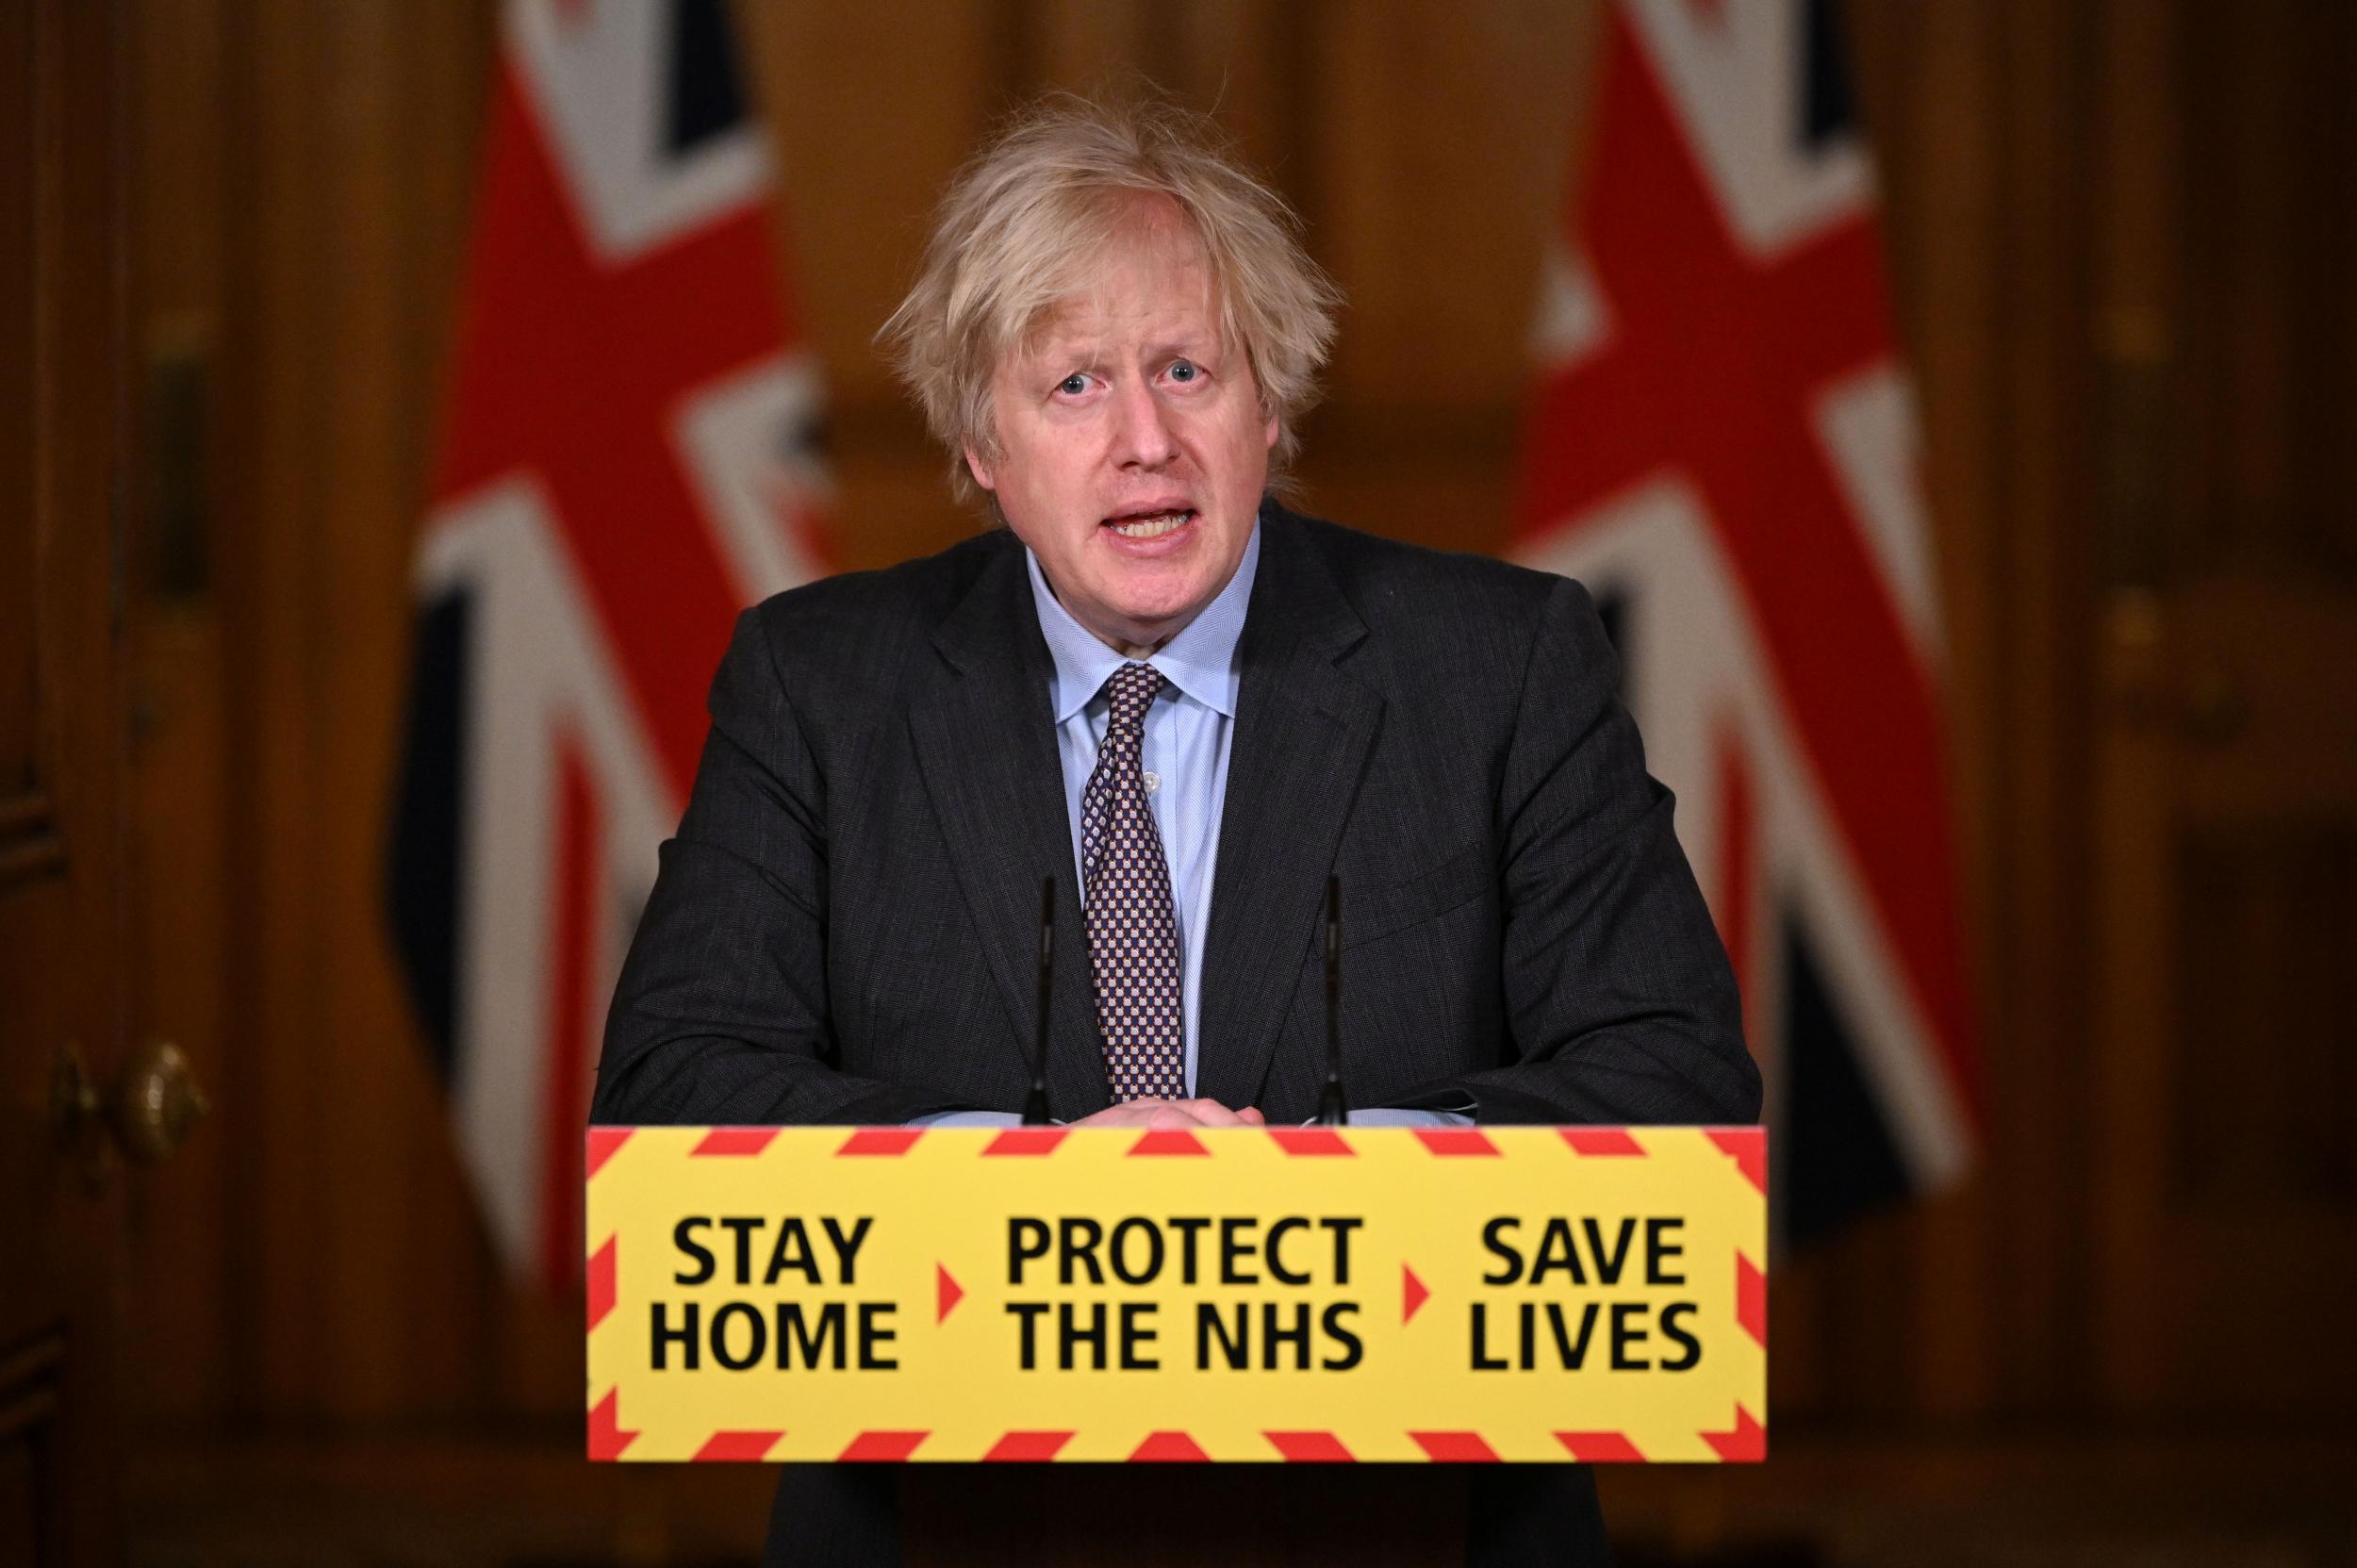 Boris Johnson updated the public on changes to the law through televised press conferences in 2020 and 2021